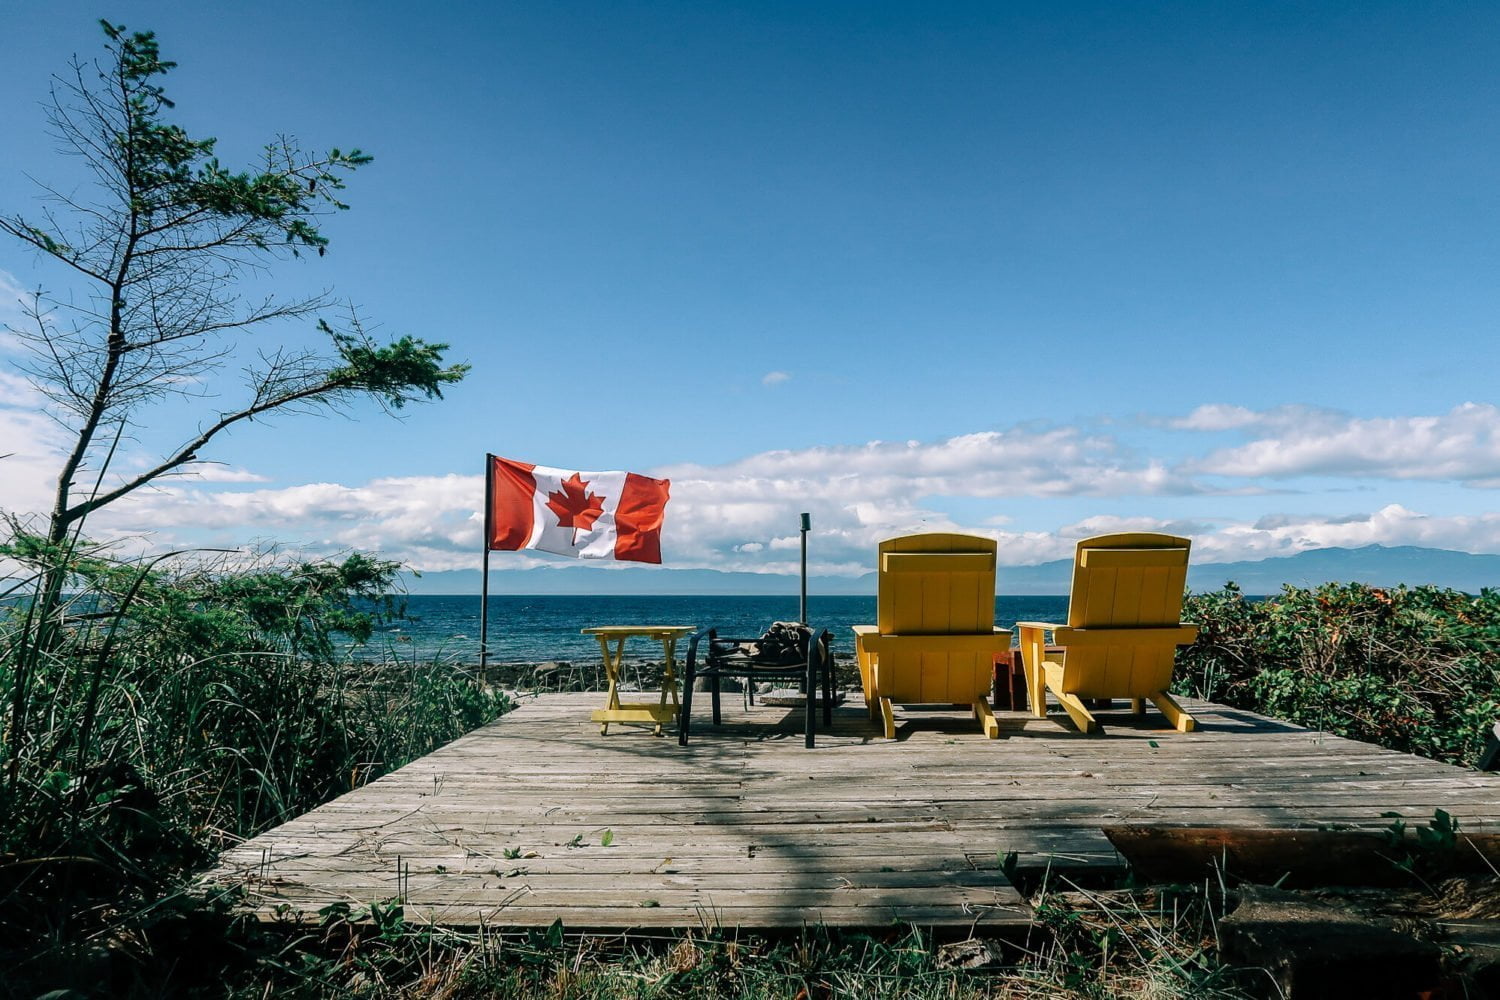 Cover image for the Savary Island travel guide: A pair of deck chairs on the beach with a flapping Canadian flag.